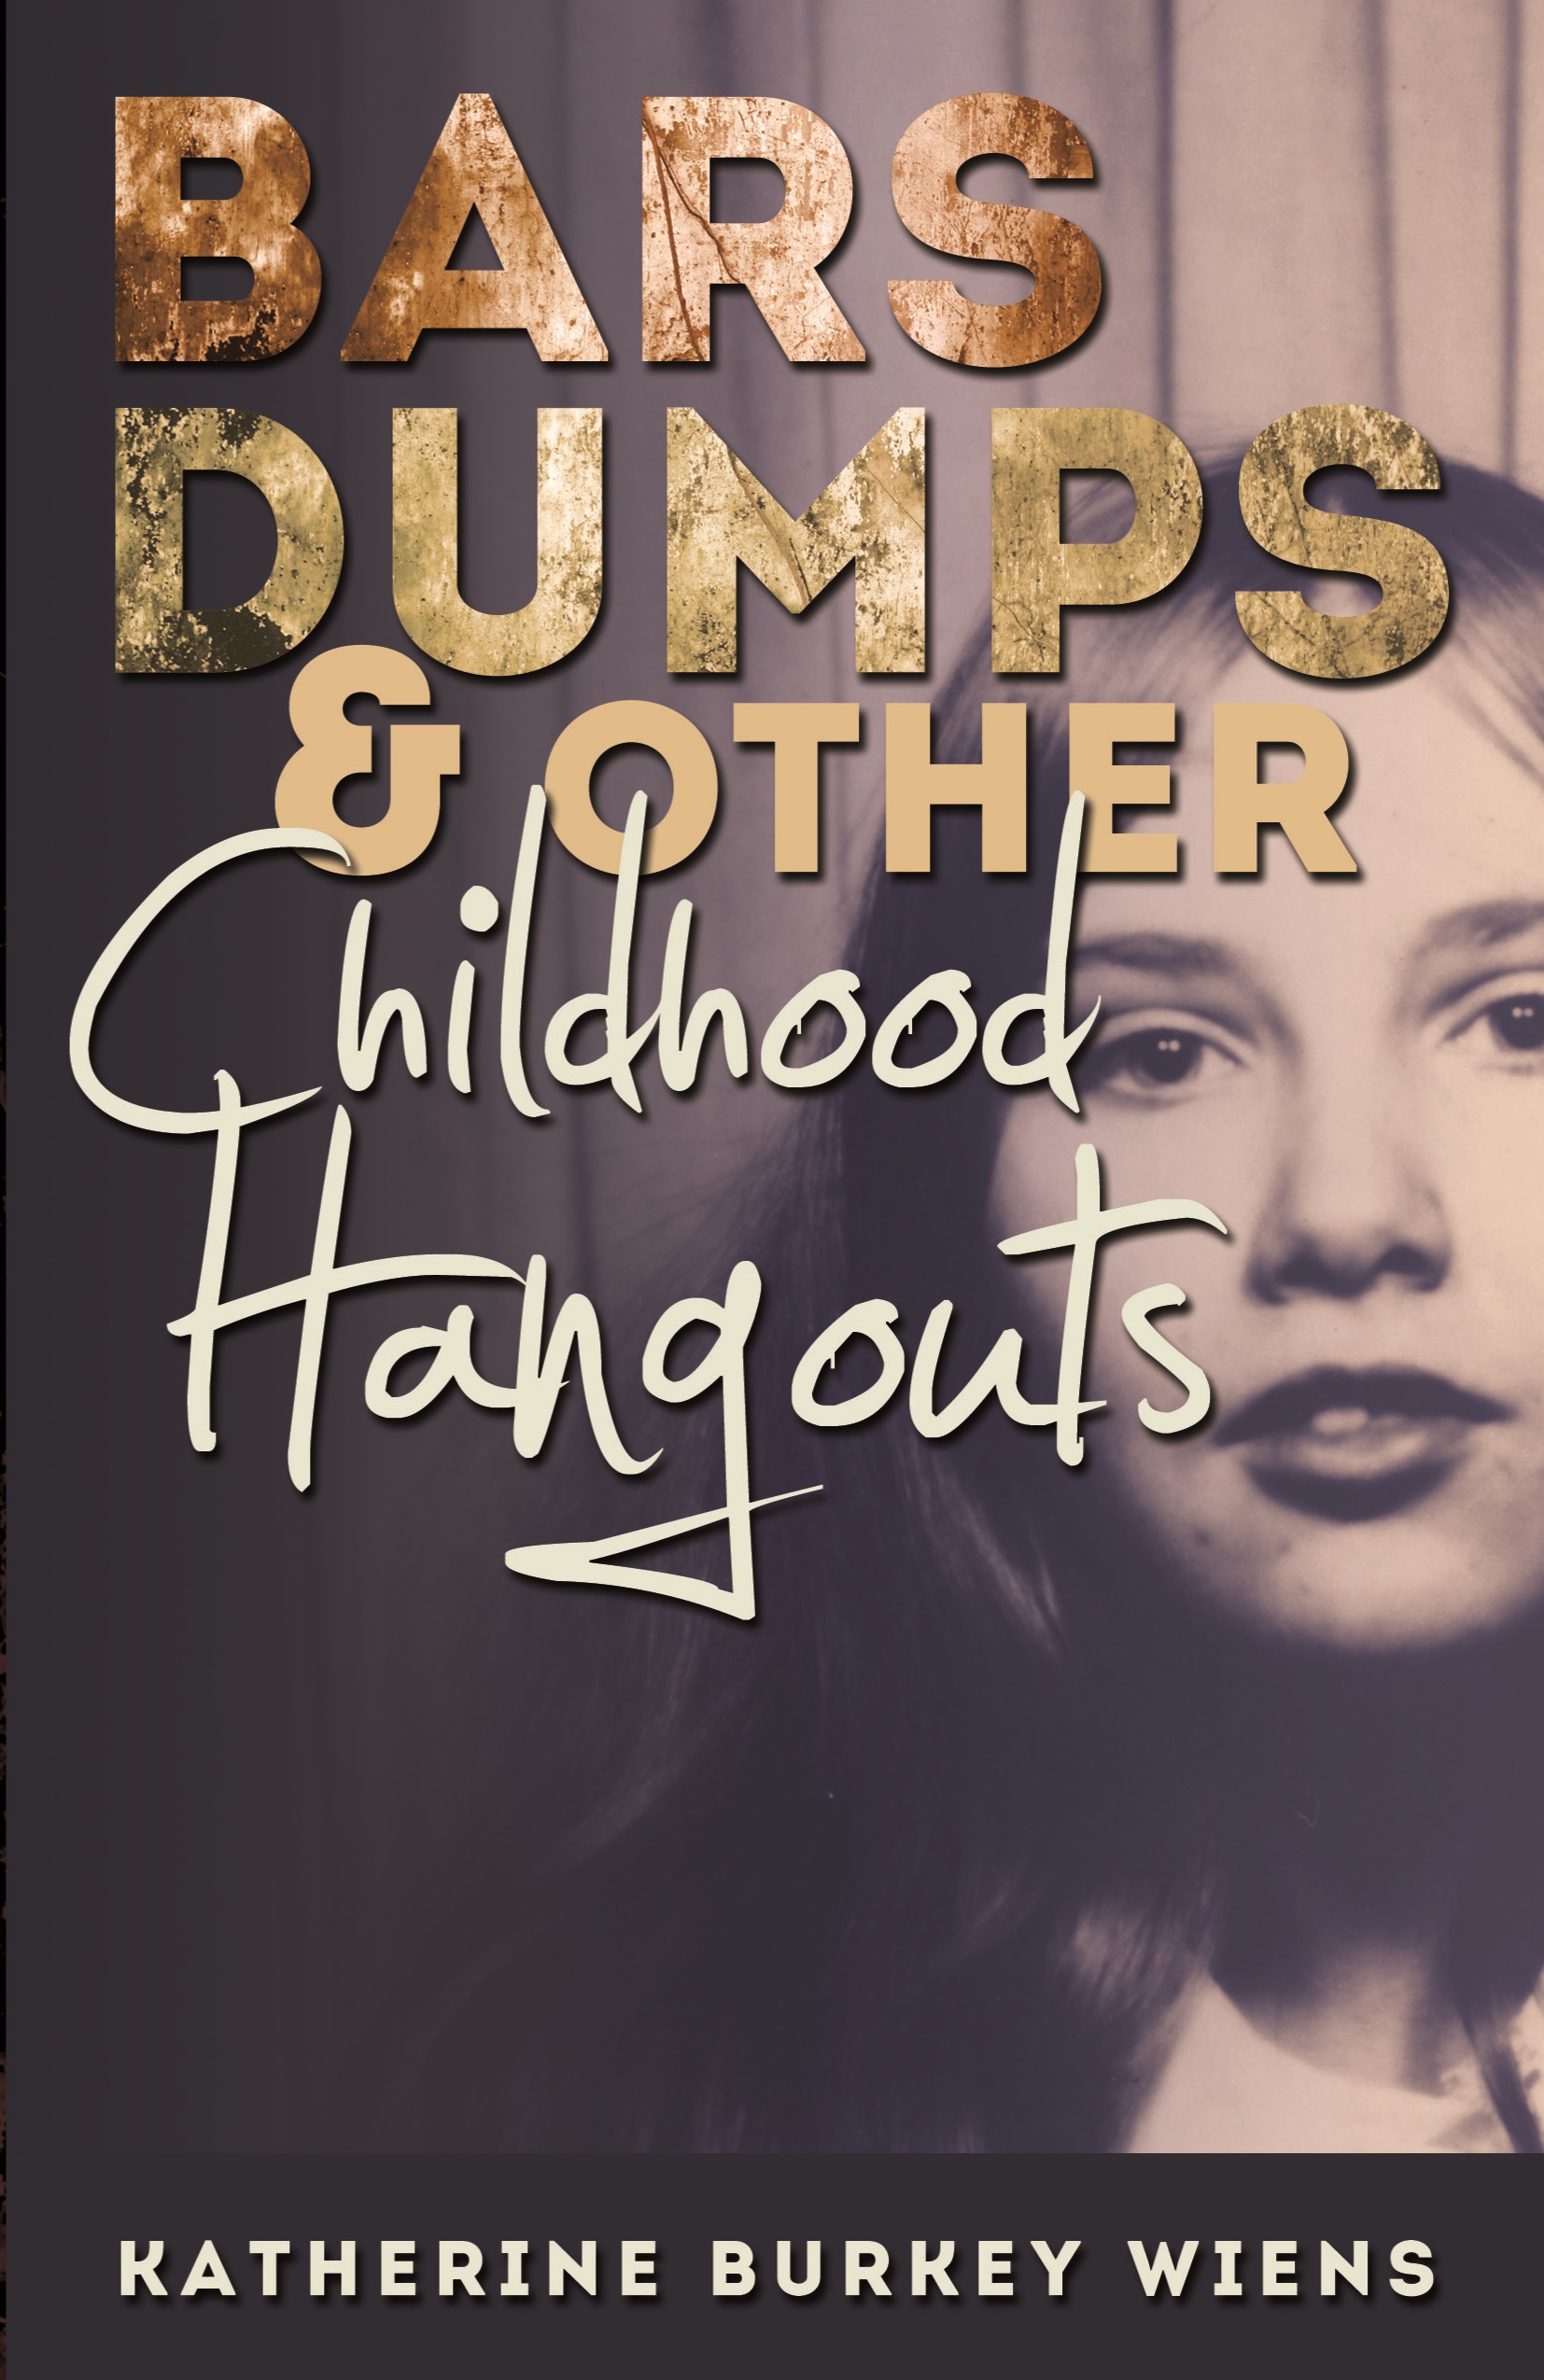 Bars, Dumps and Other Childhood Hangouts